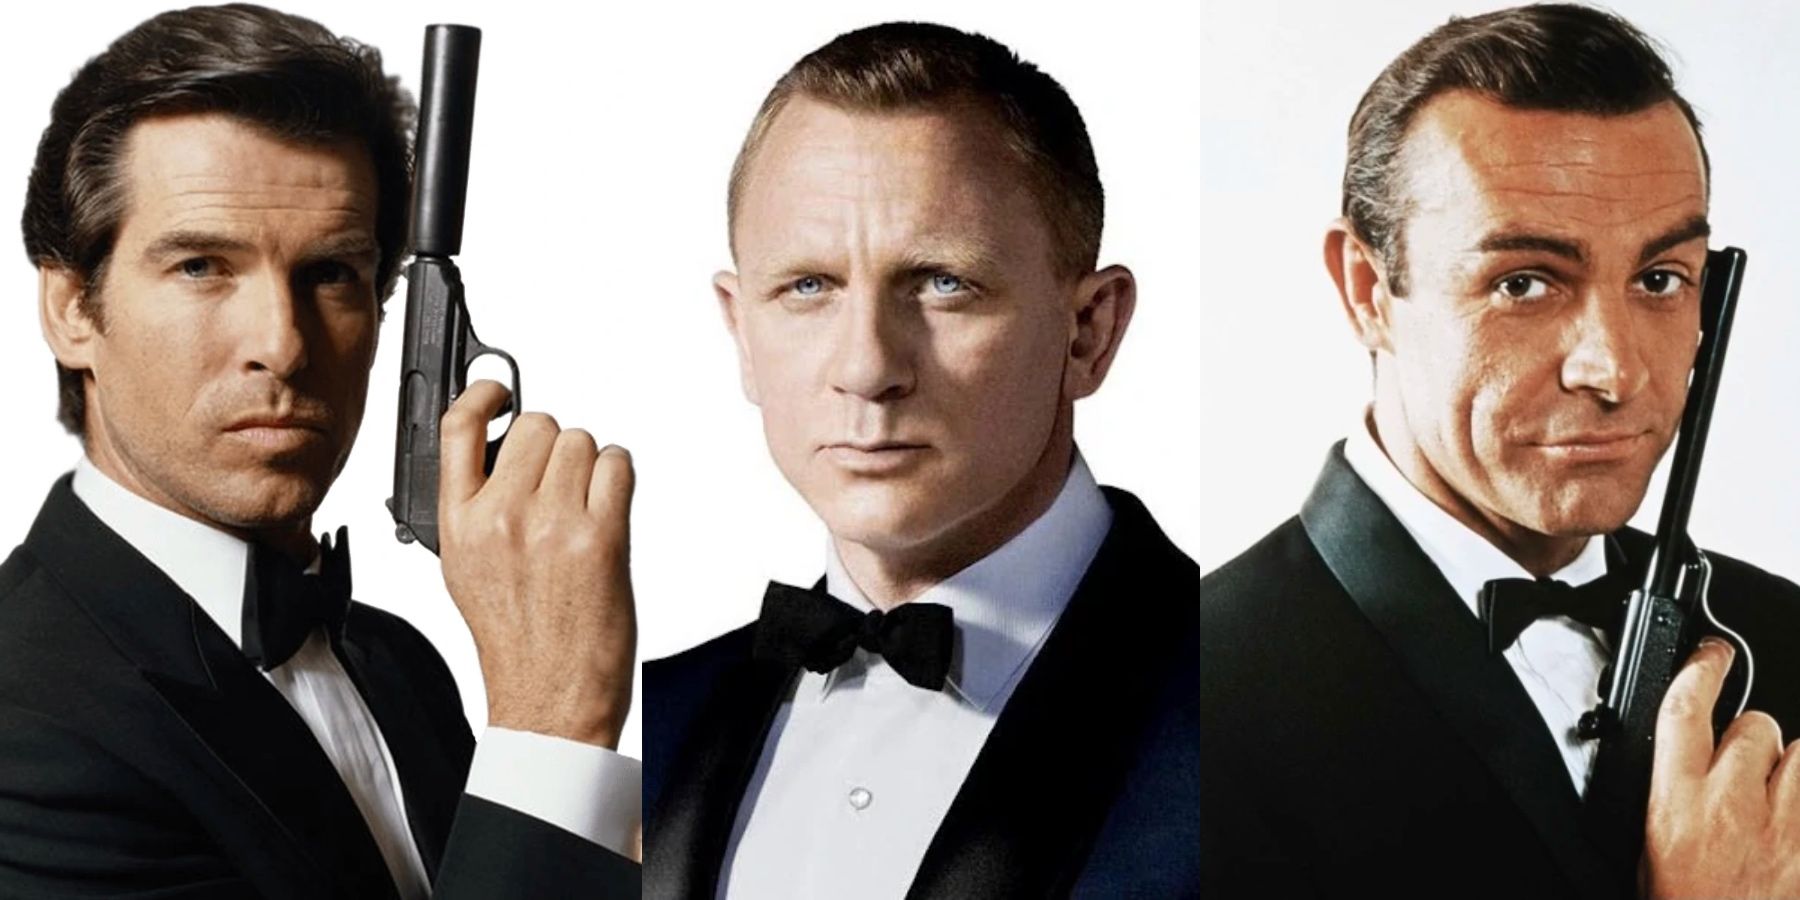 James Bond Producers Want Decade Of Commitment From Next 007 Actor